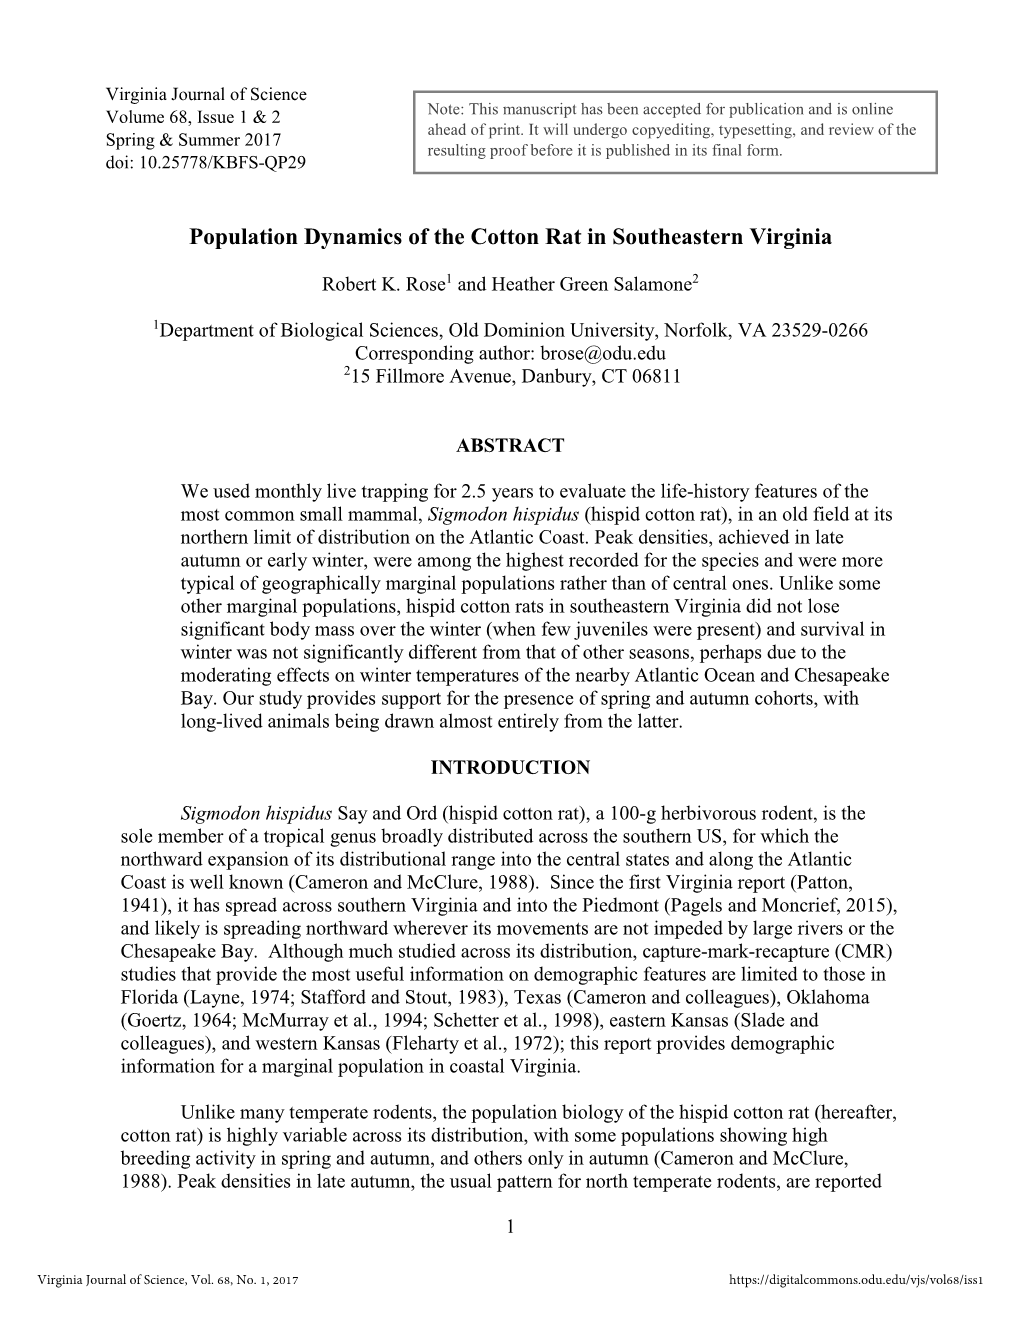 Population Dynamics of the Cotton Rat in Southeastern Virginia